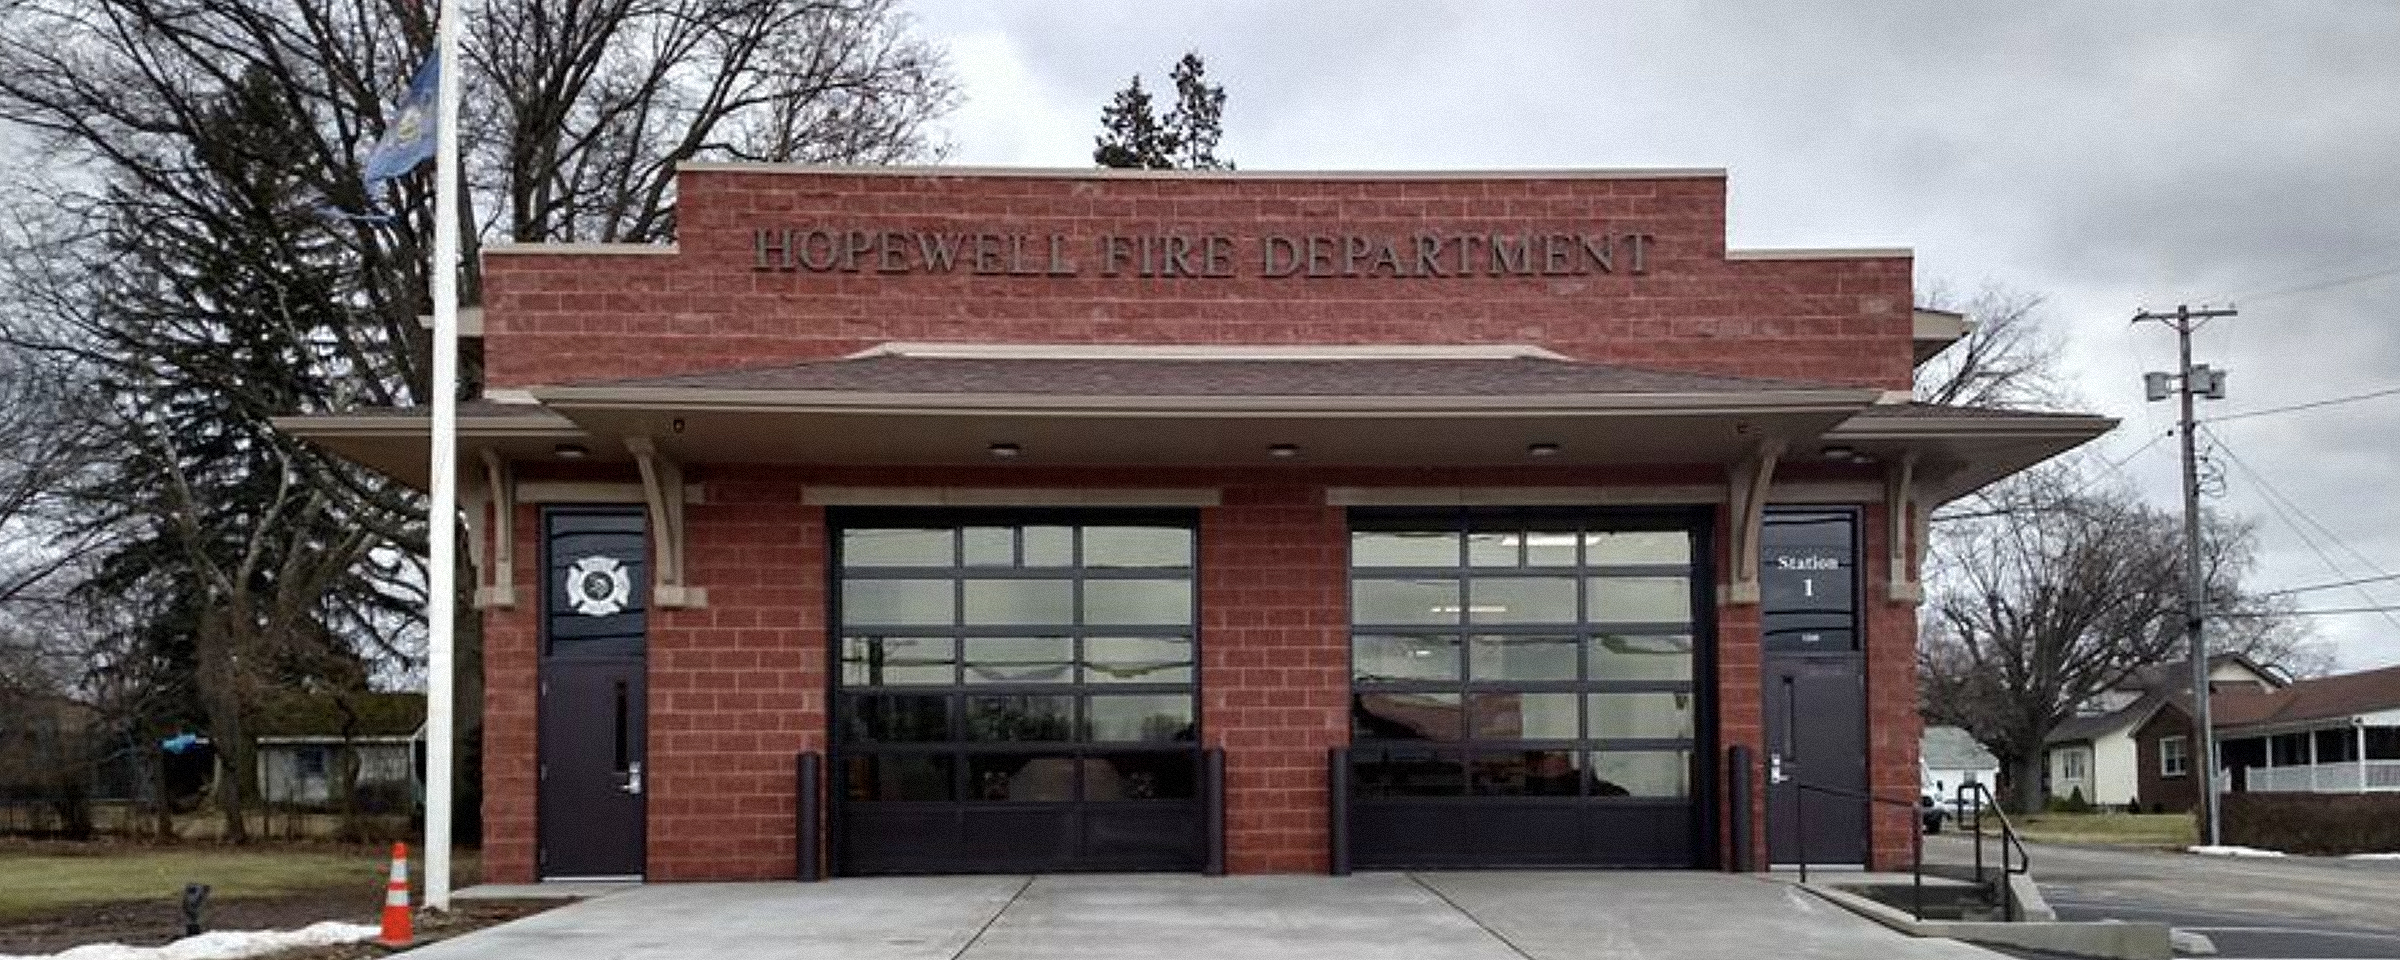 Hopewell Township Fire Department